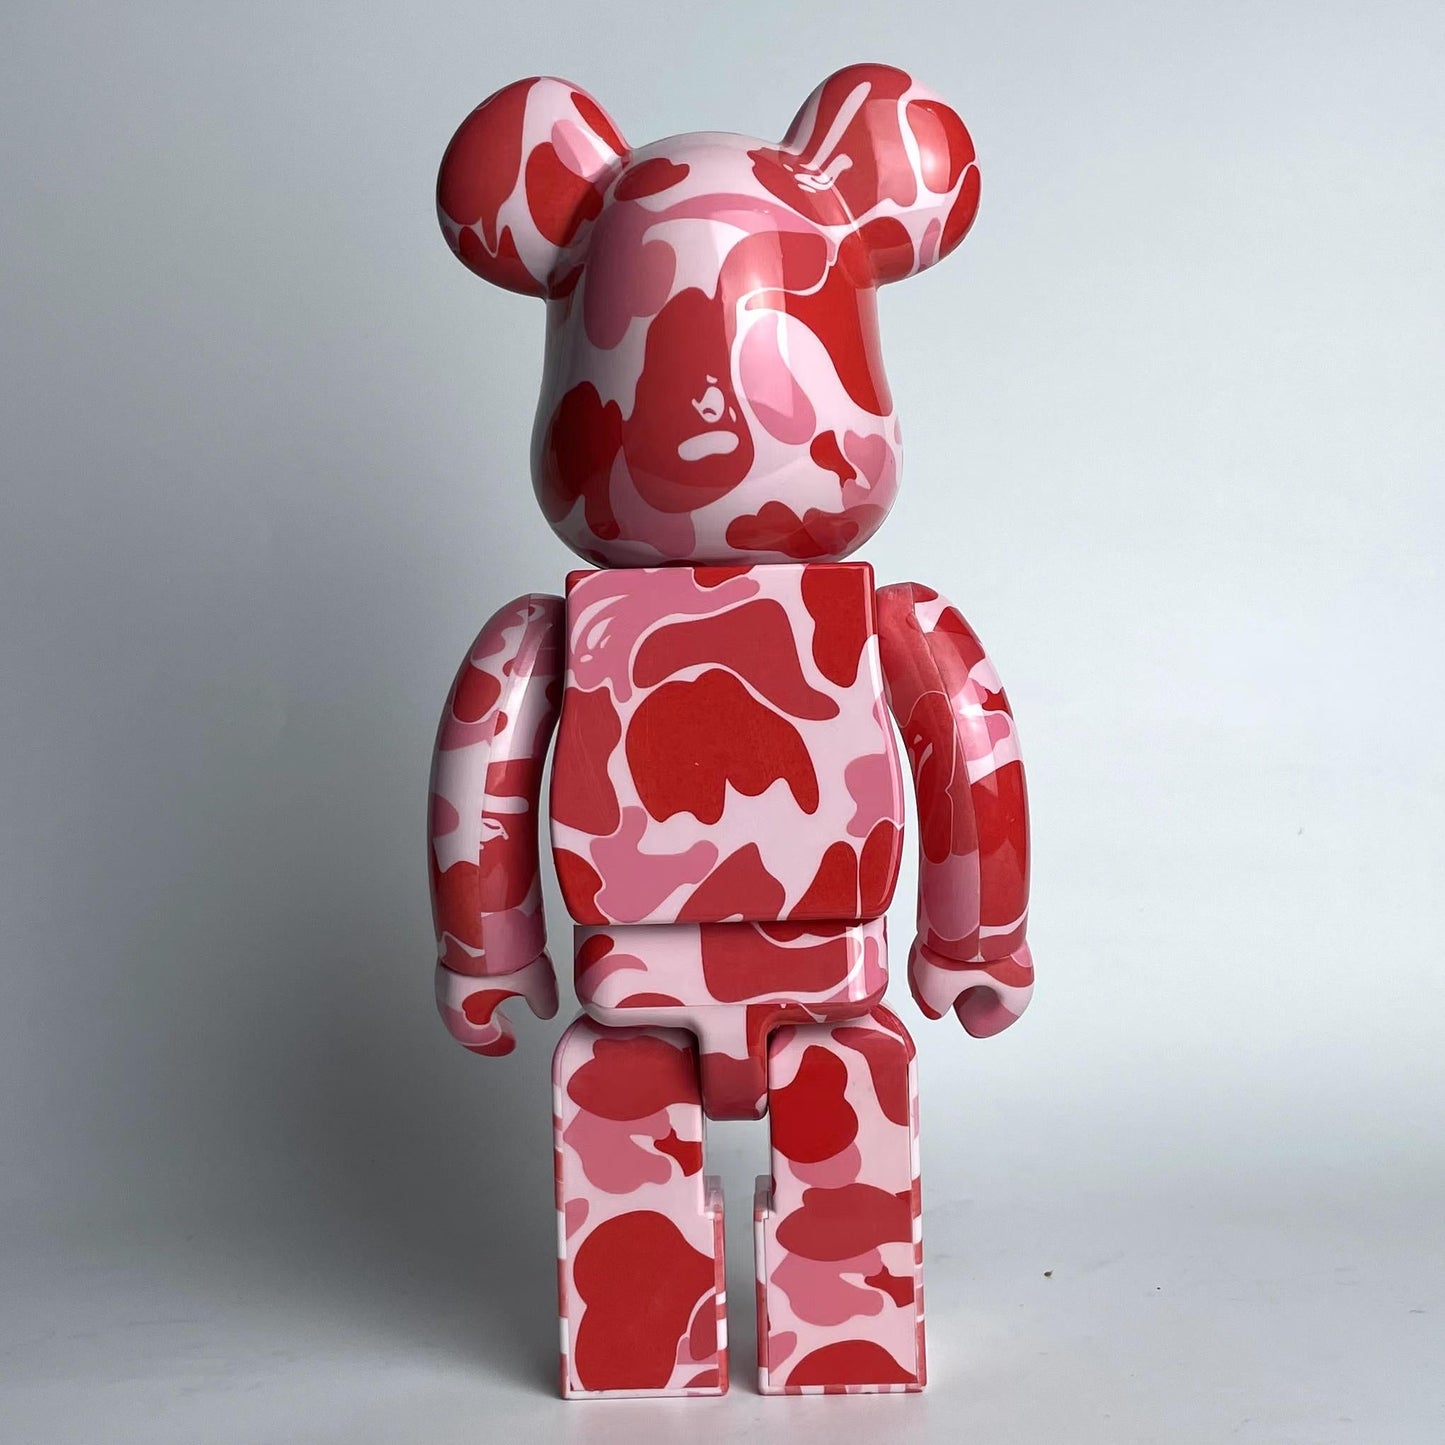 28cm BEARBRICK 400% BAPE Camouflage MMJ Pink ABS Action Figure Boxed-FuGui Tide play